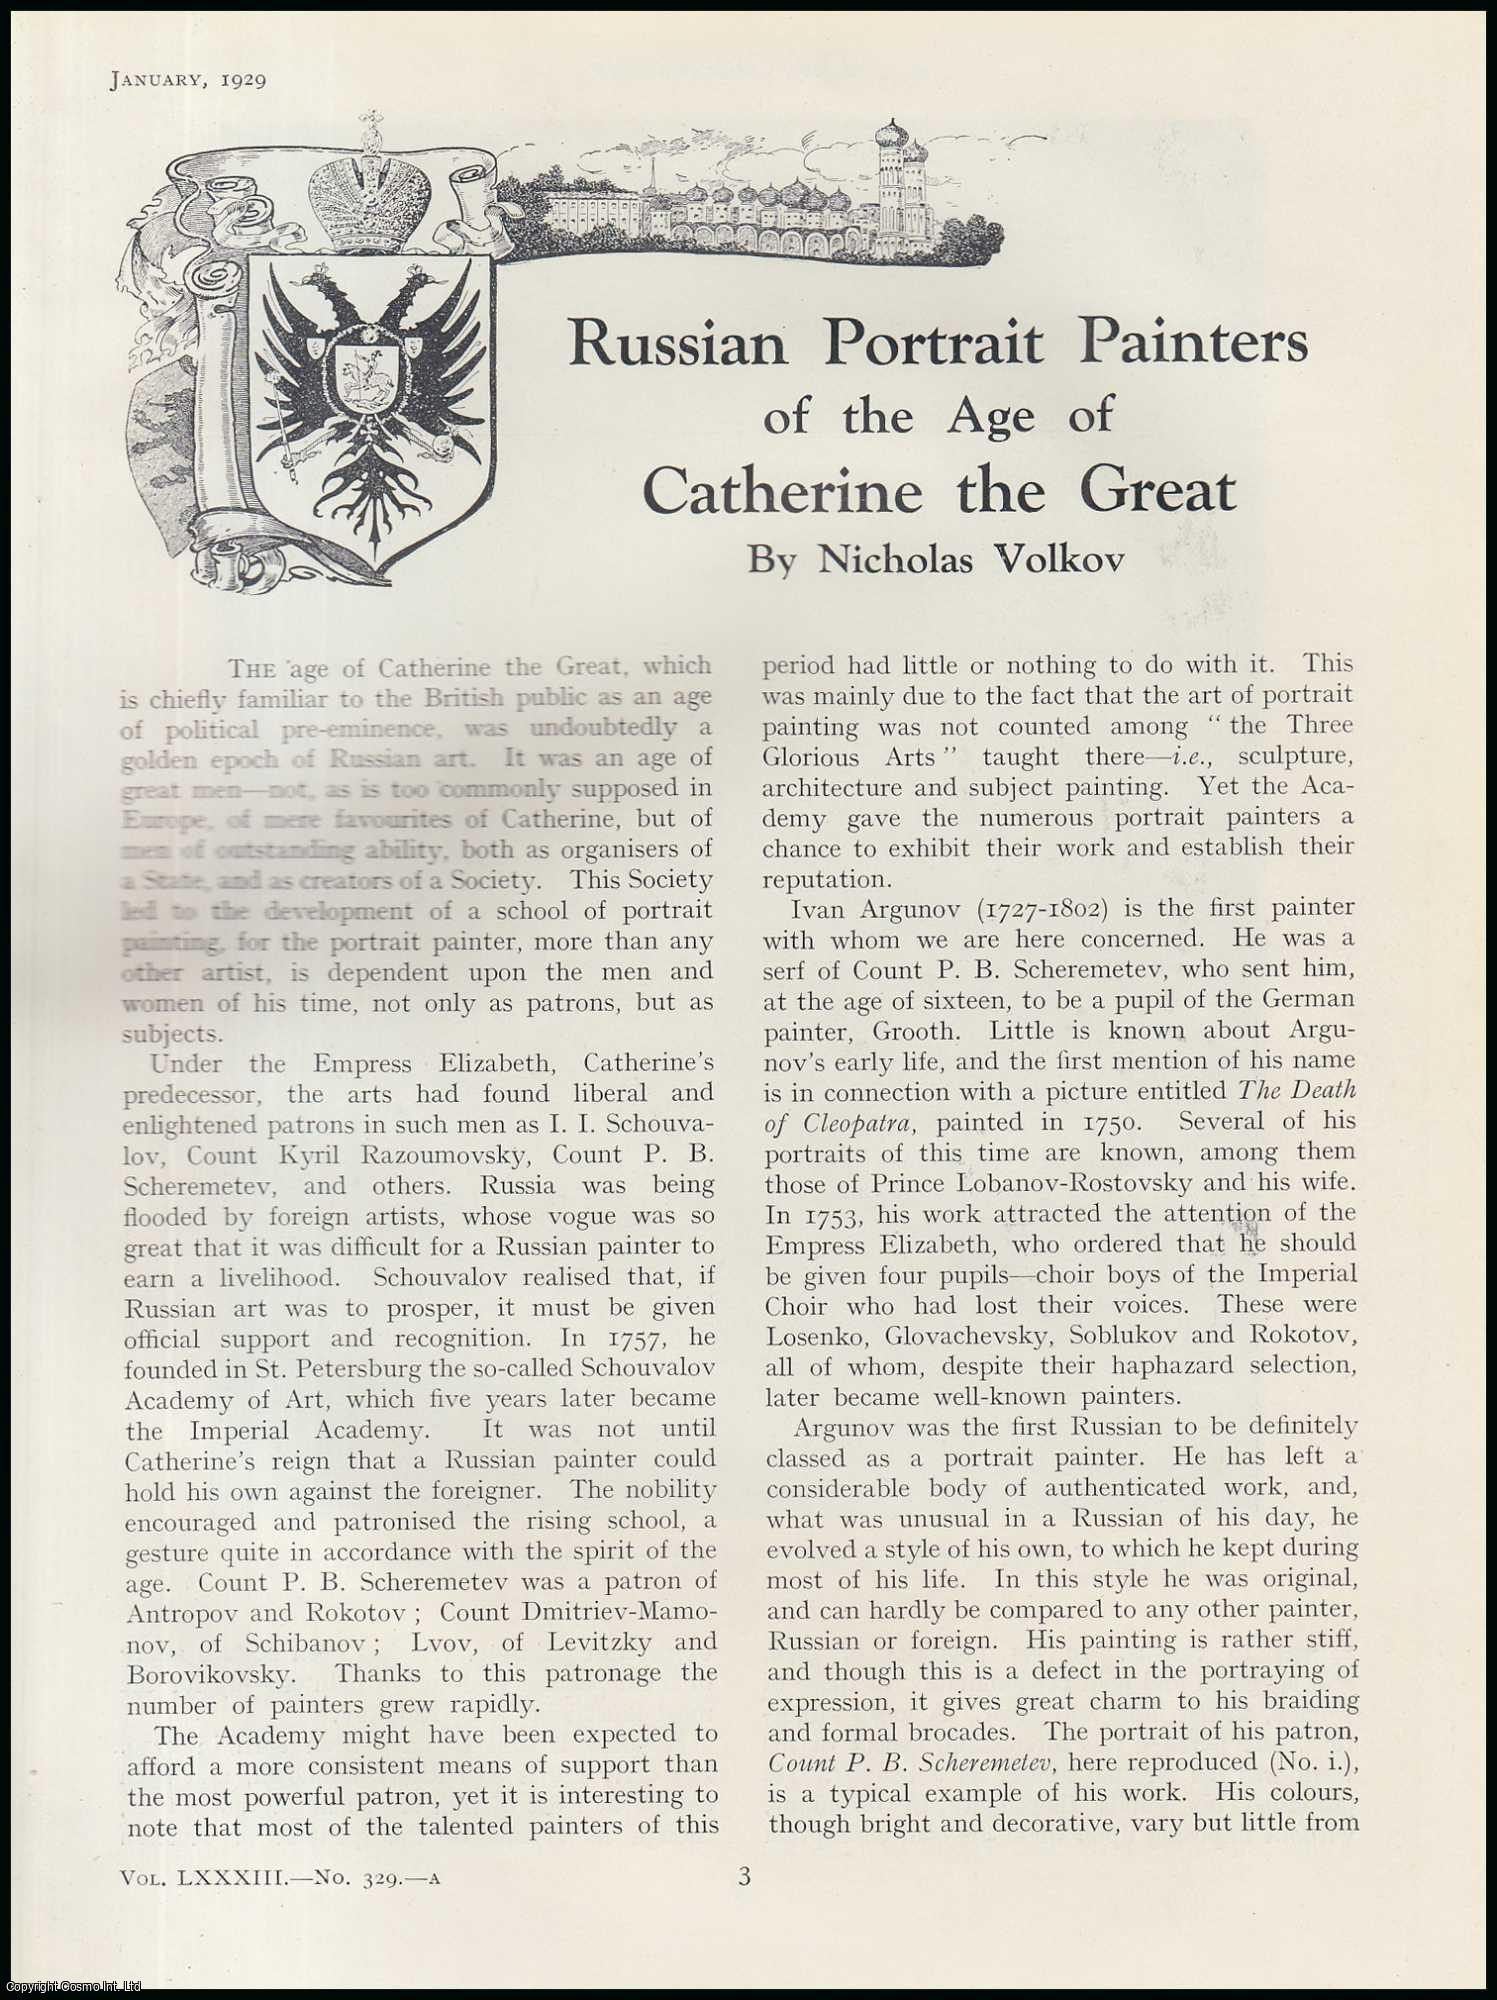 Nicholas Volkov - Ivan Argunov ; D. Levitzky ; Alexey Antropov & Losenko : Russian Portrait Painters of The Age of Catherine The Great. An original article from The Connoisseur, 1929.